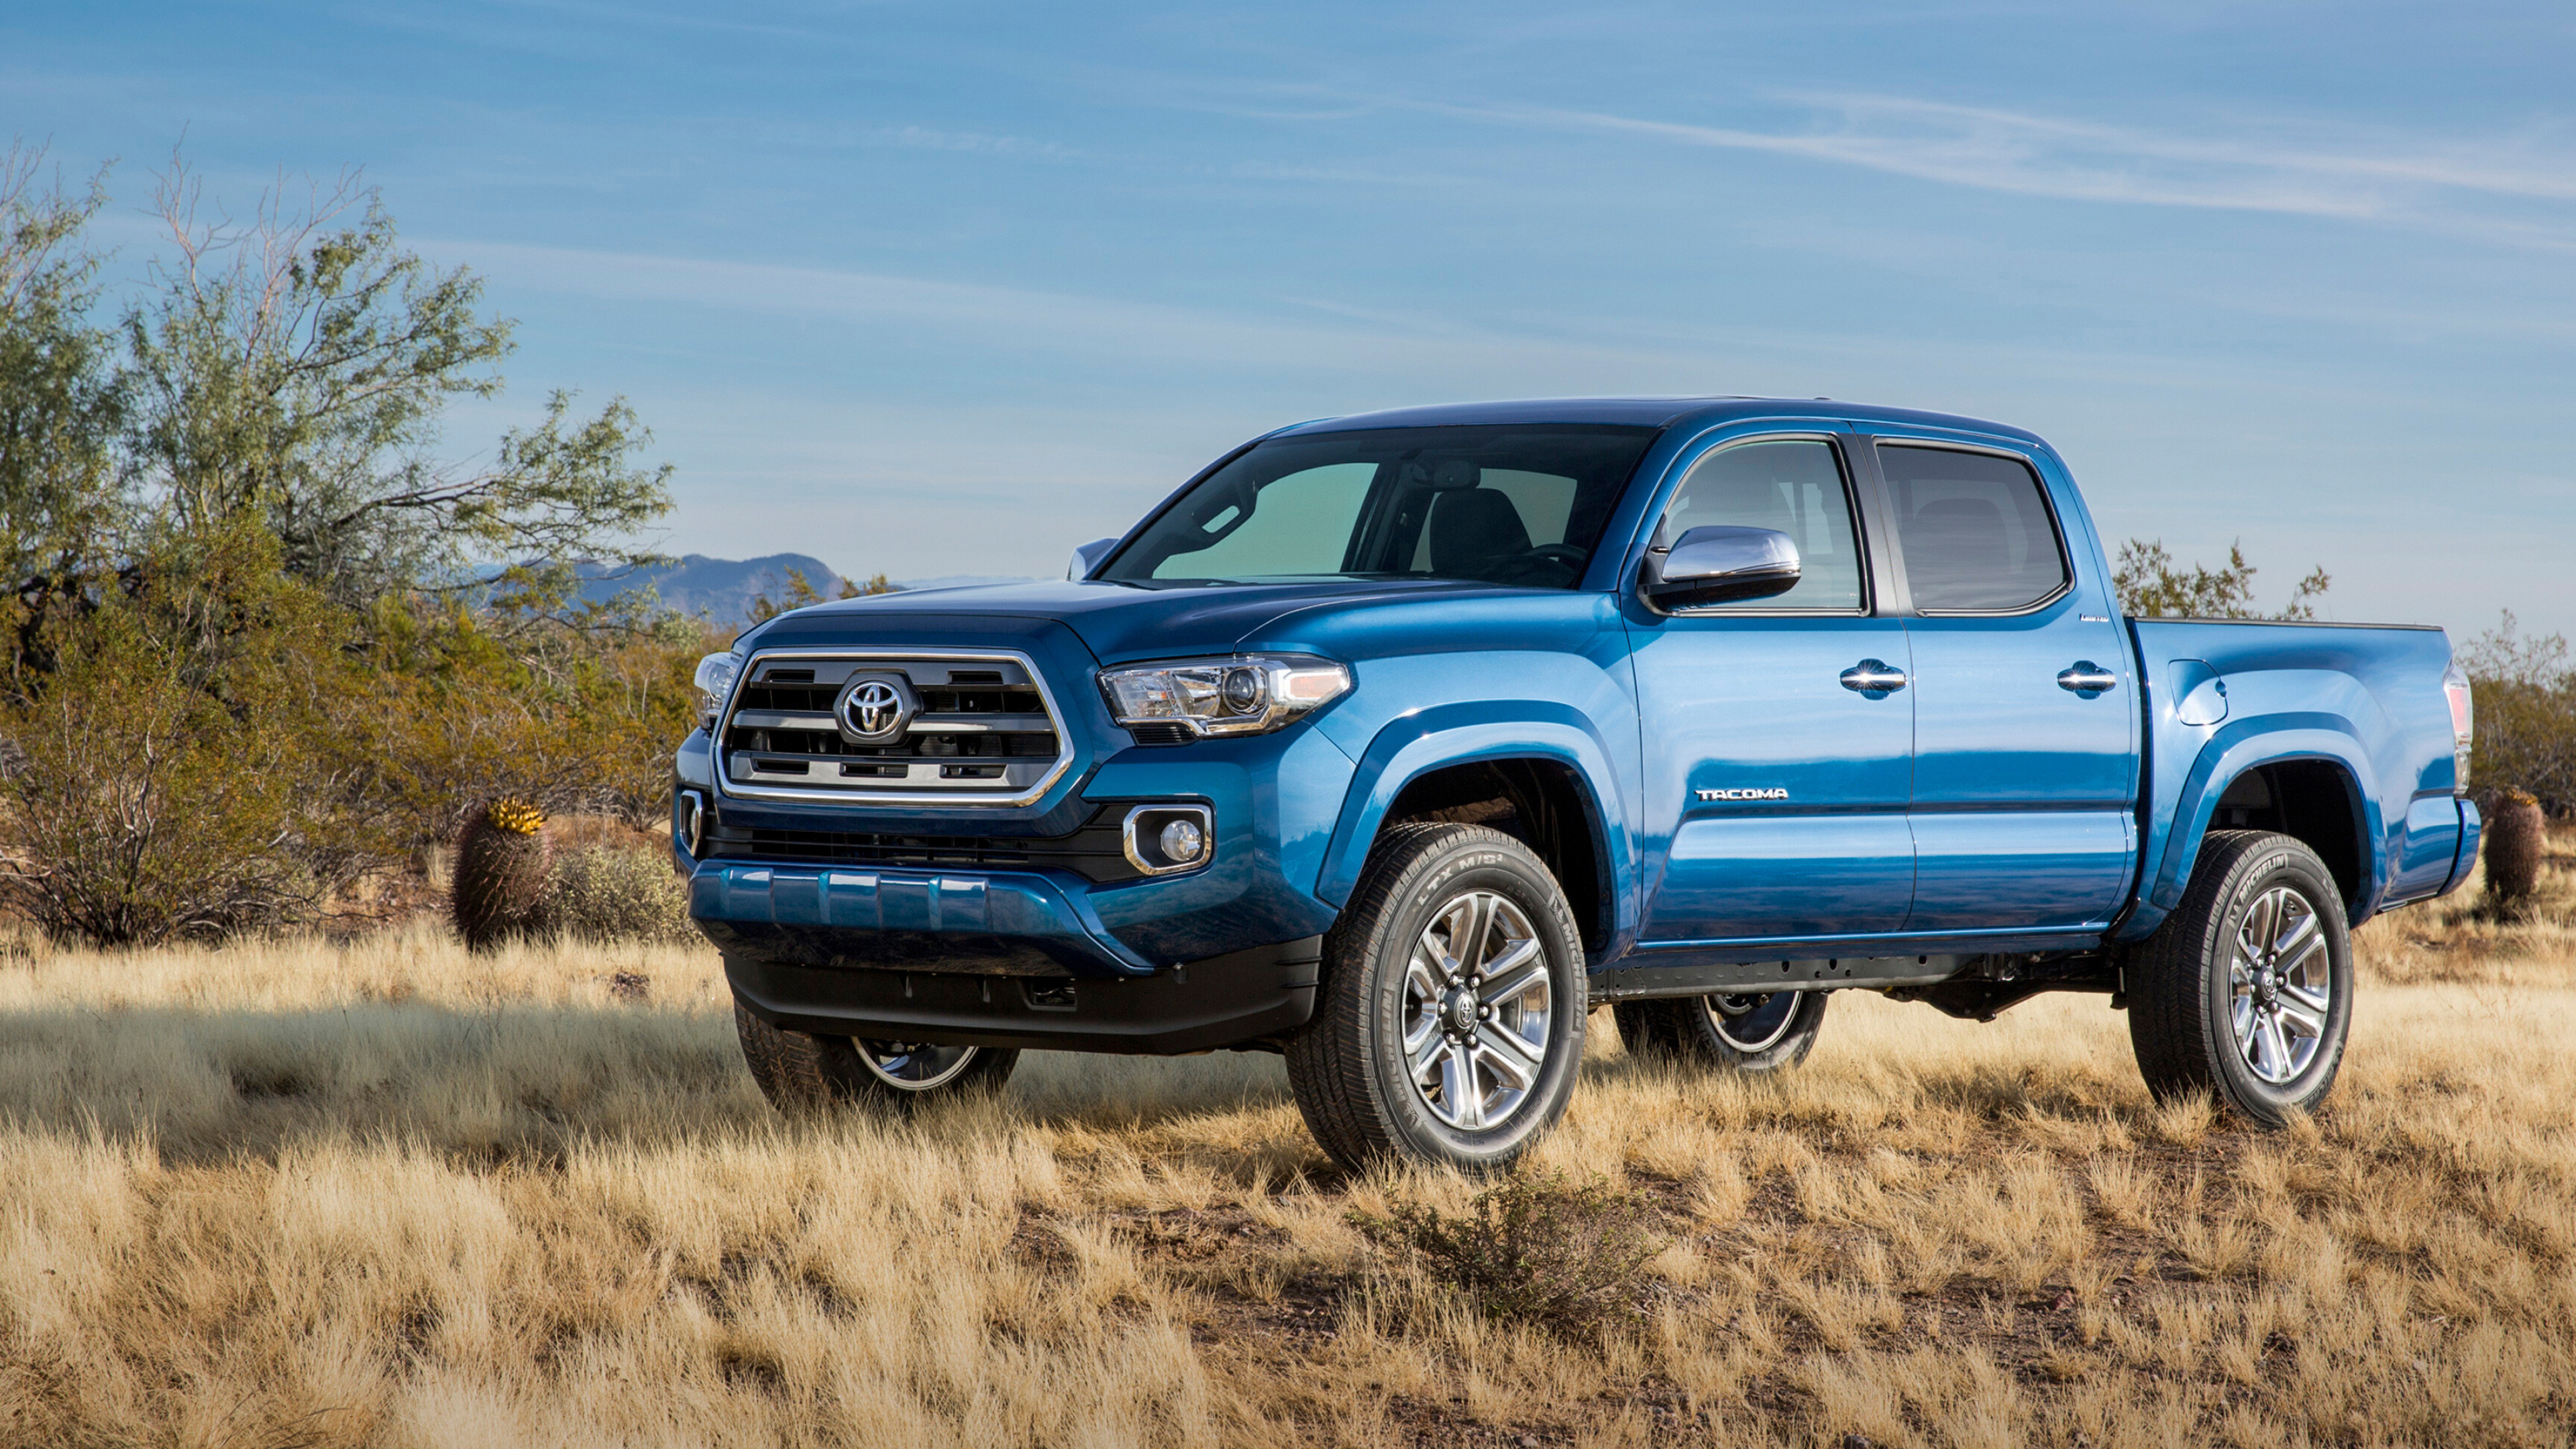 Toyota Tacoma: Cars, Limited Double Cab model, A light-duty truck. 3840x2160 4K Background.